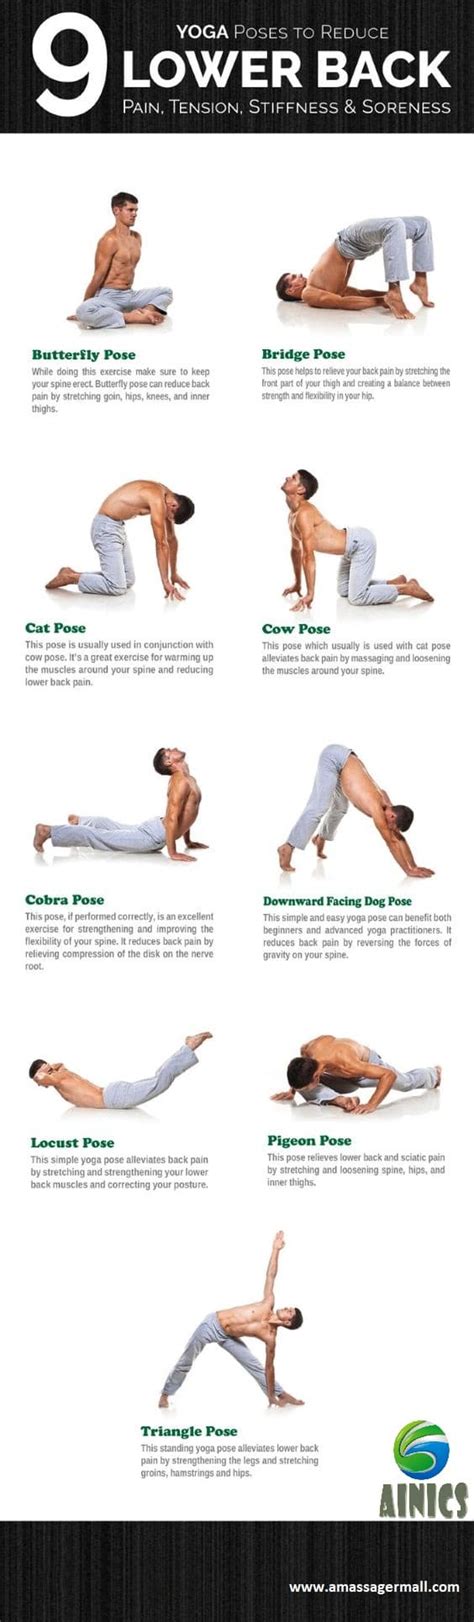 Back pain is common problem. 9 Yoga poses to reduce lower back pain - ainics